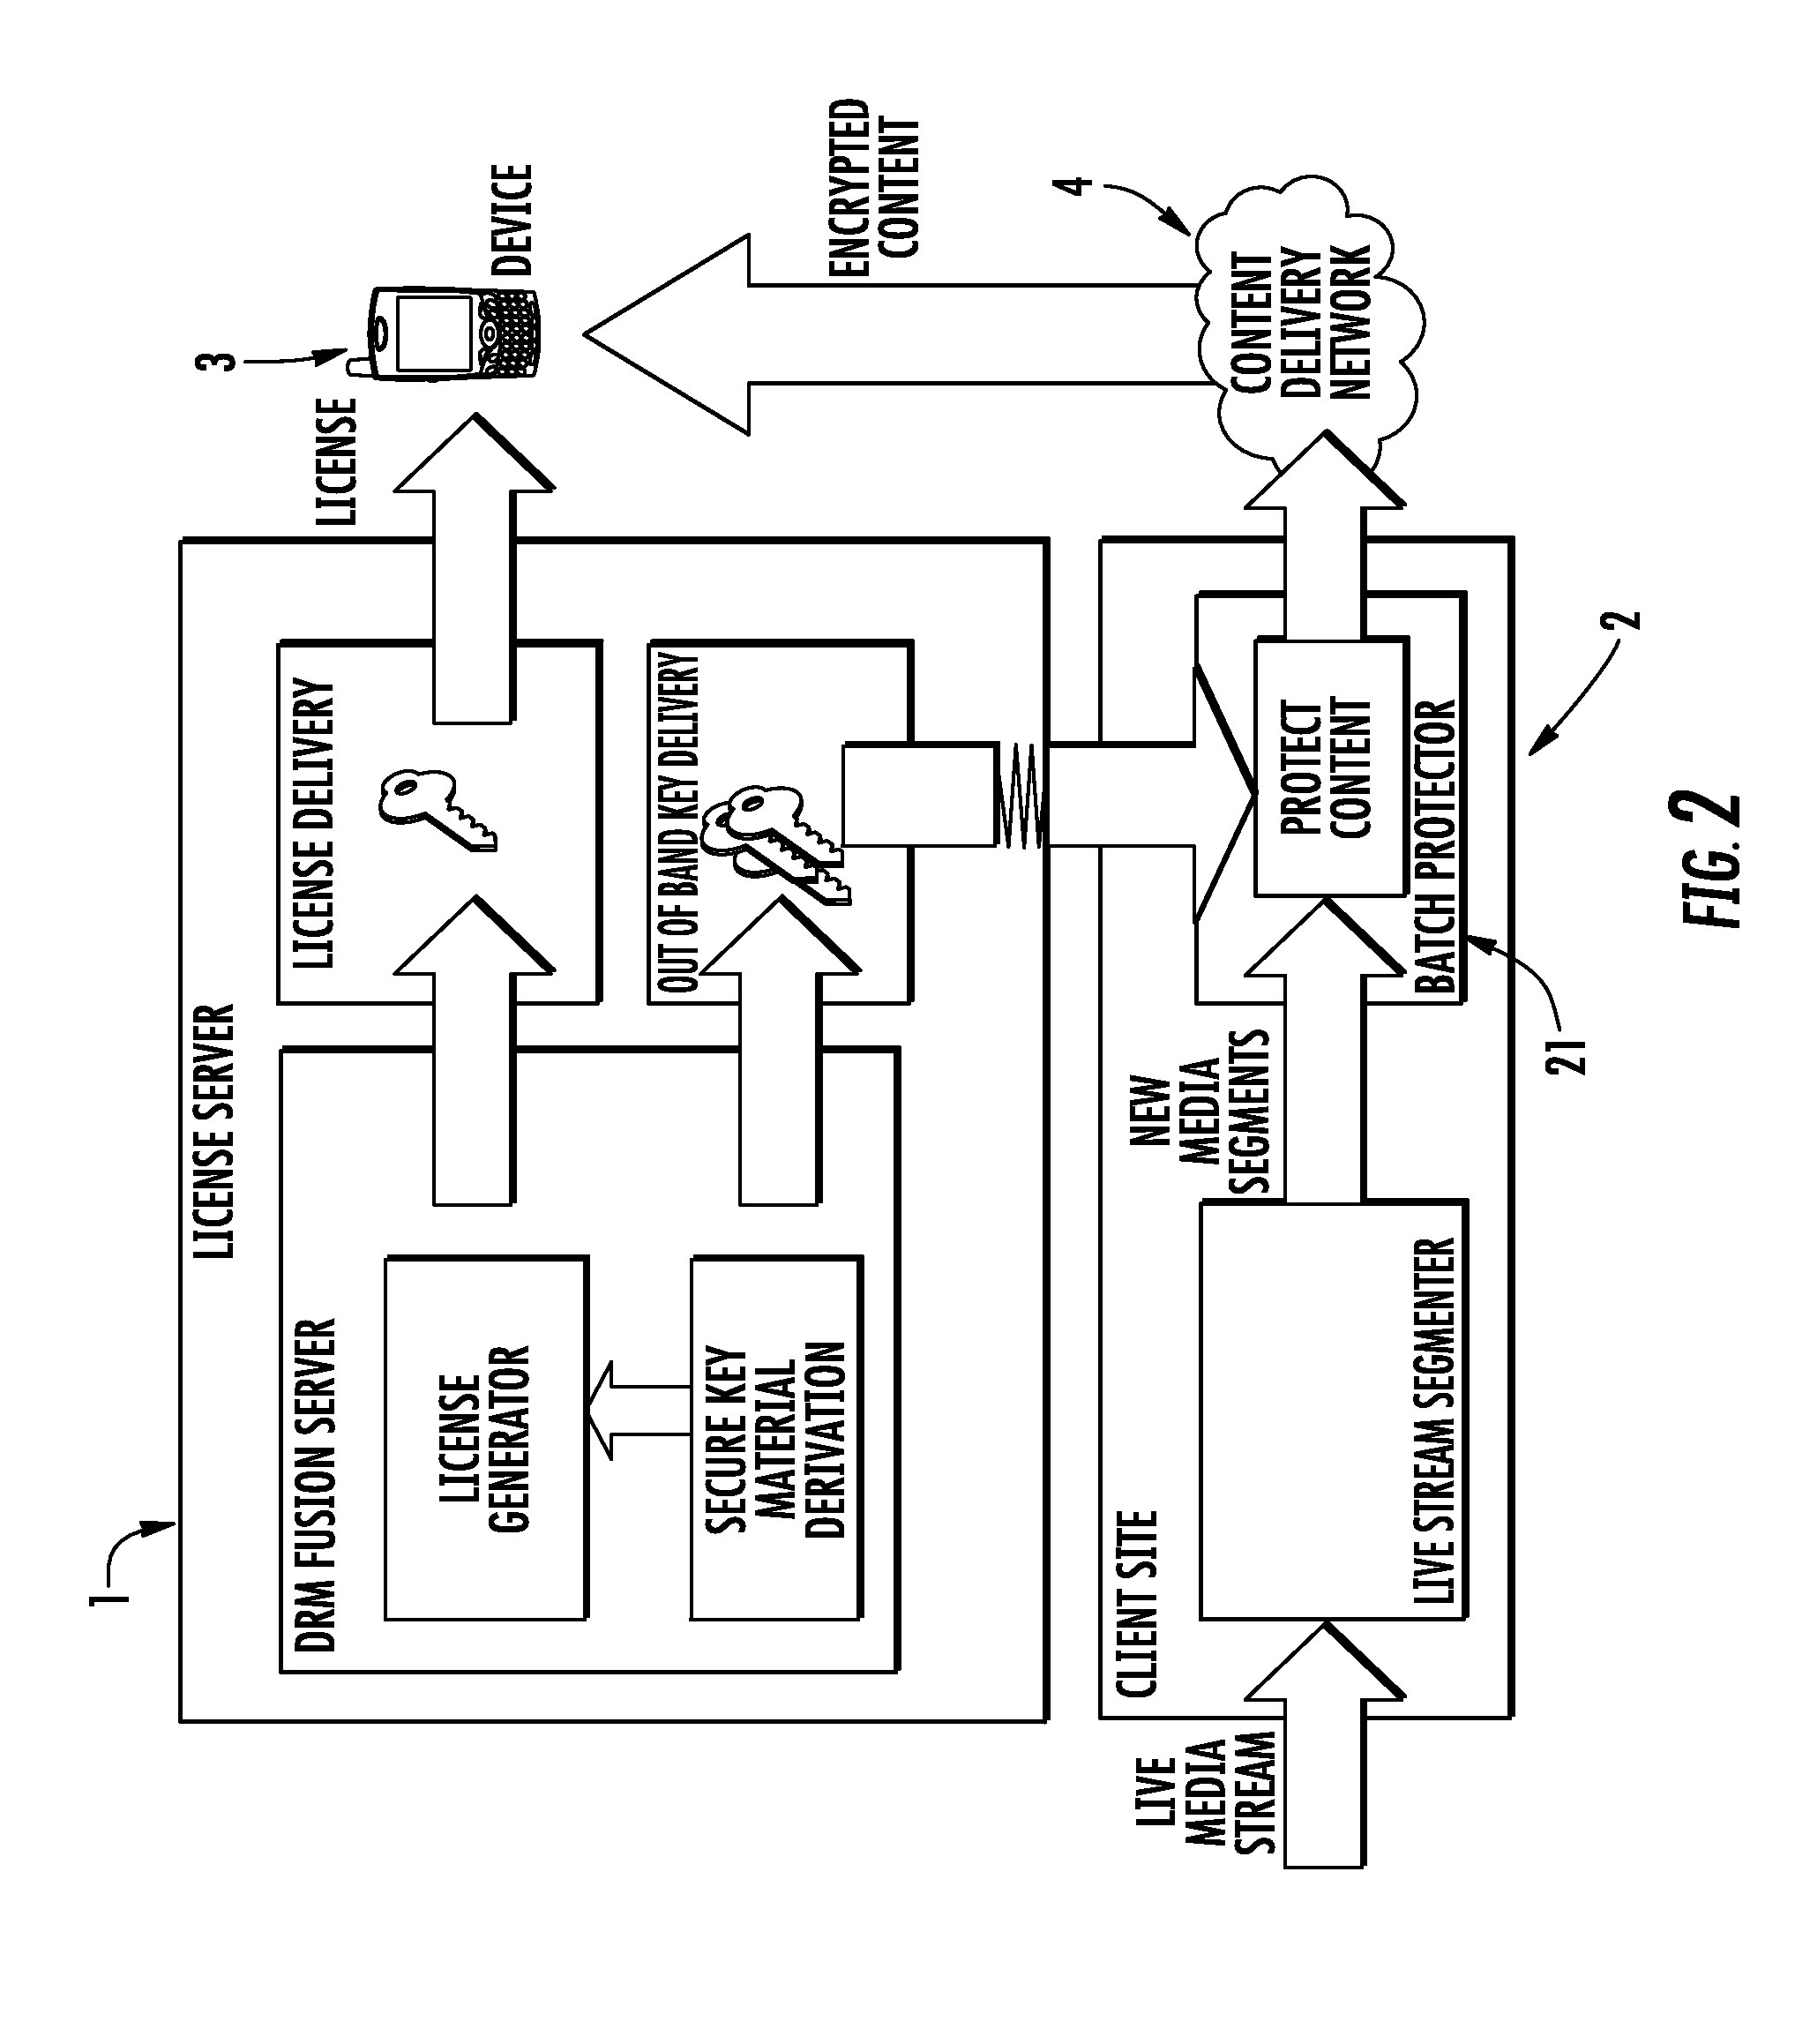 Method for playing digital contents protected with a drm (digital right management) scheme and corresponding system